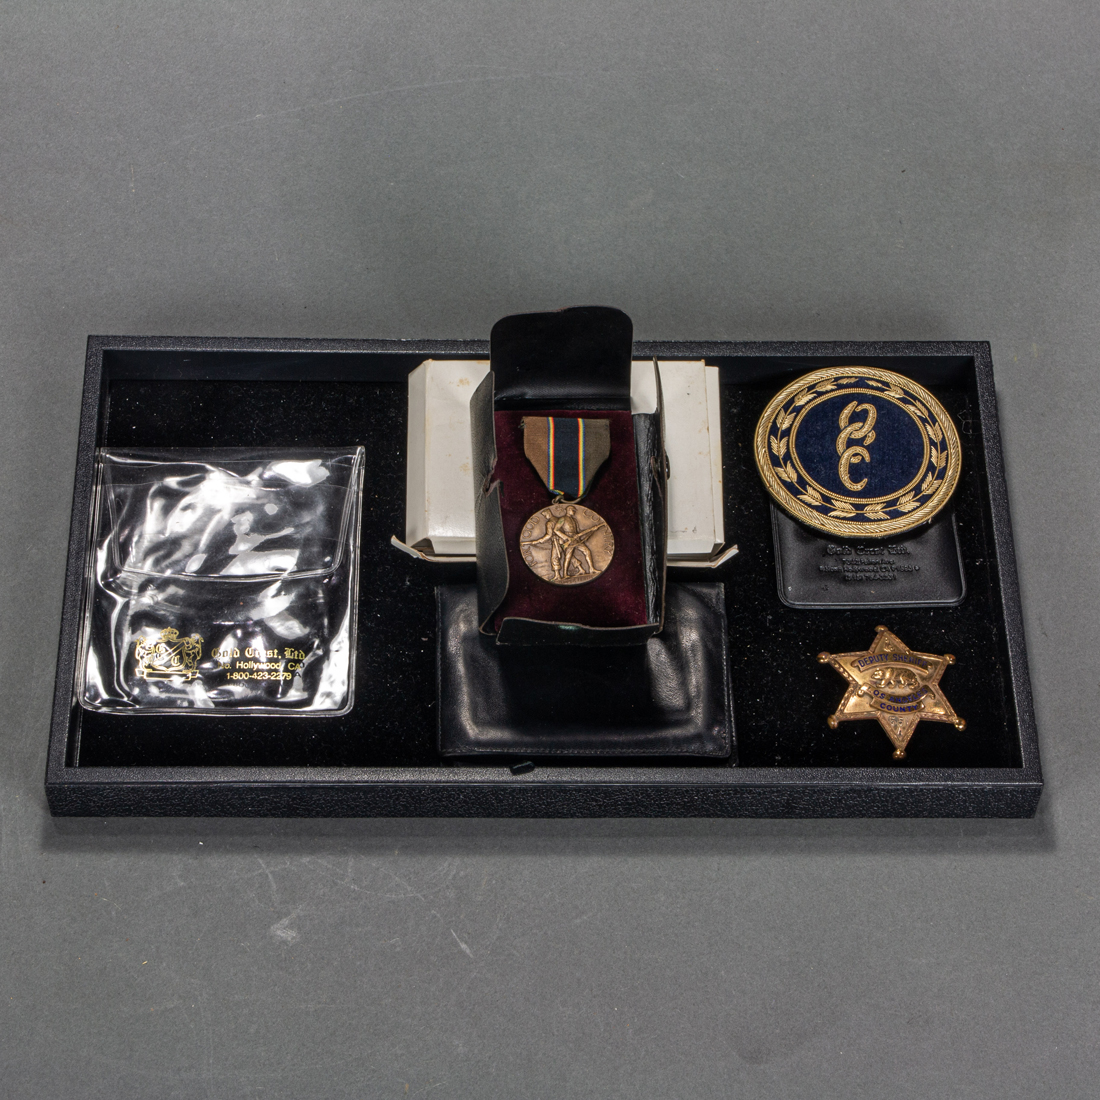 GENTLEMAN S MEDALS AND PERSONAL 3a0f9d